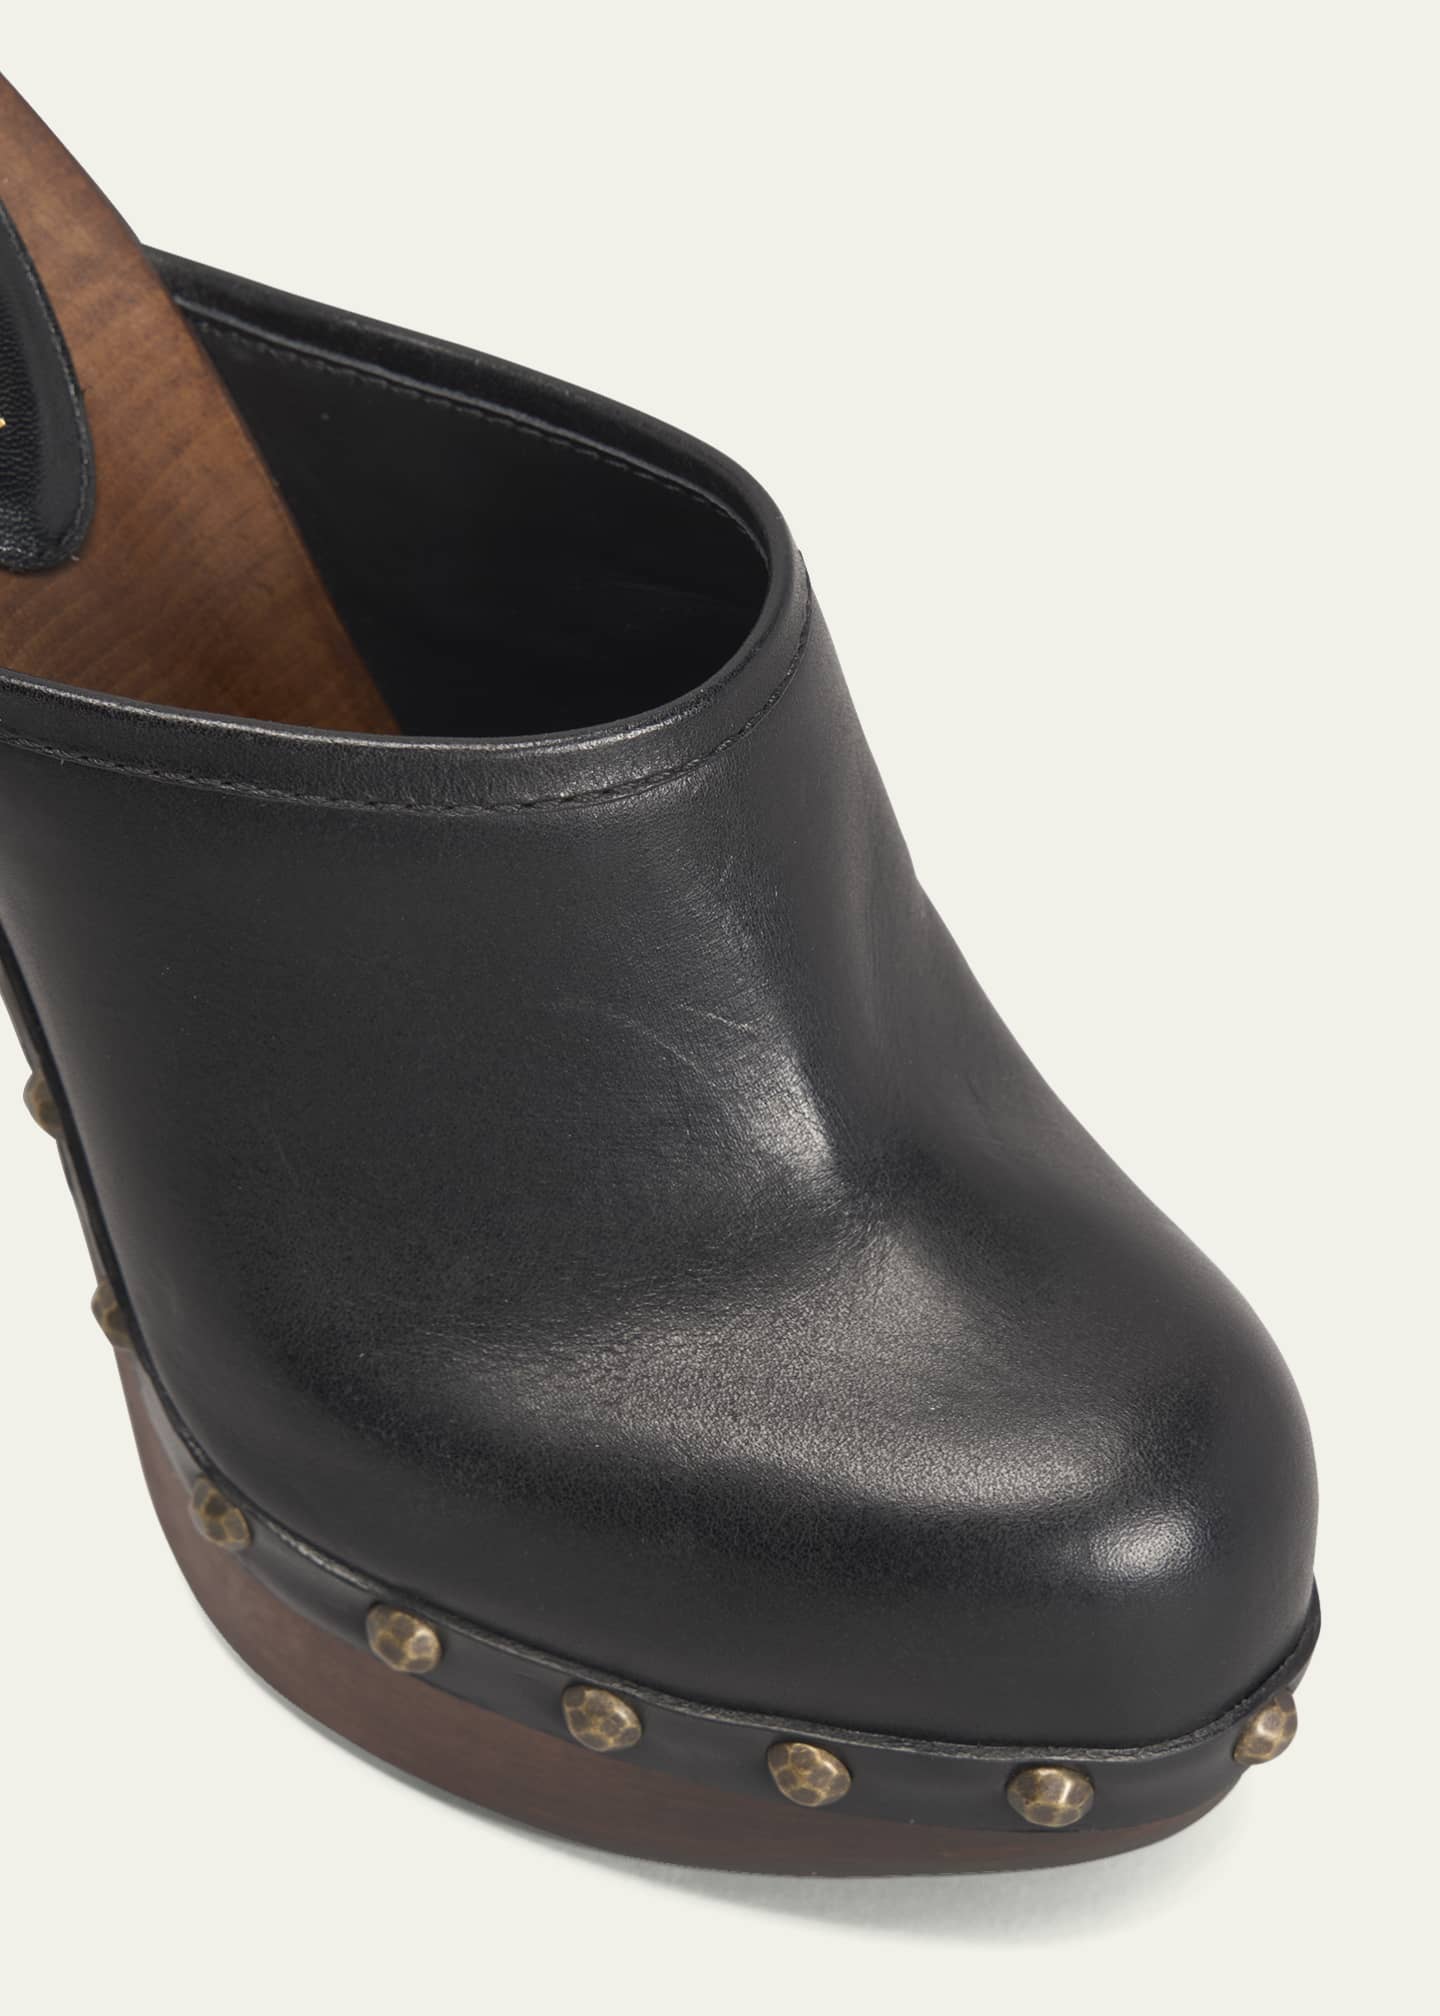  Lotta From Stockholm Swedish Classic Clogs - Black Leather  Clogs for Women I Supportive Wooden Clog with Buckled Strap 2 inch Heel,  3/4 inch Platform -35